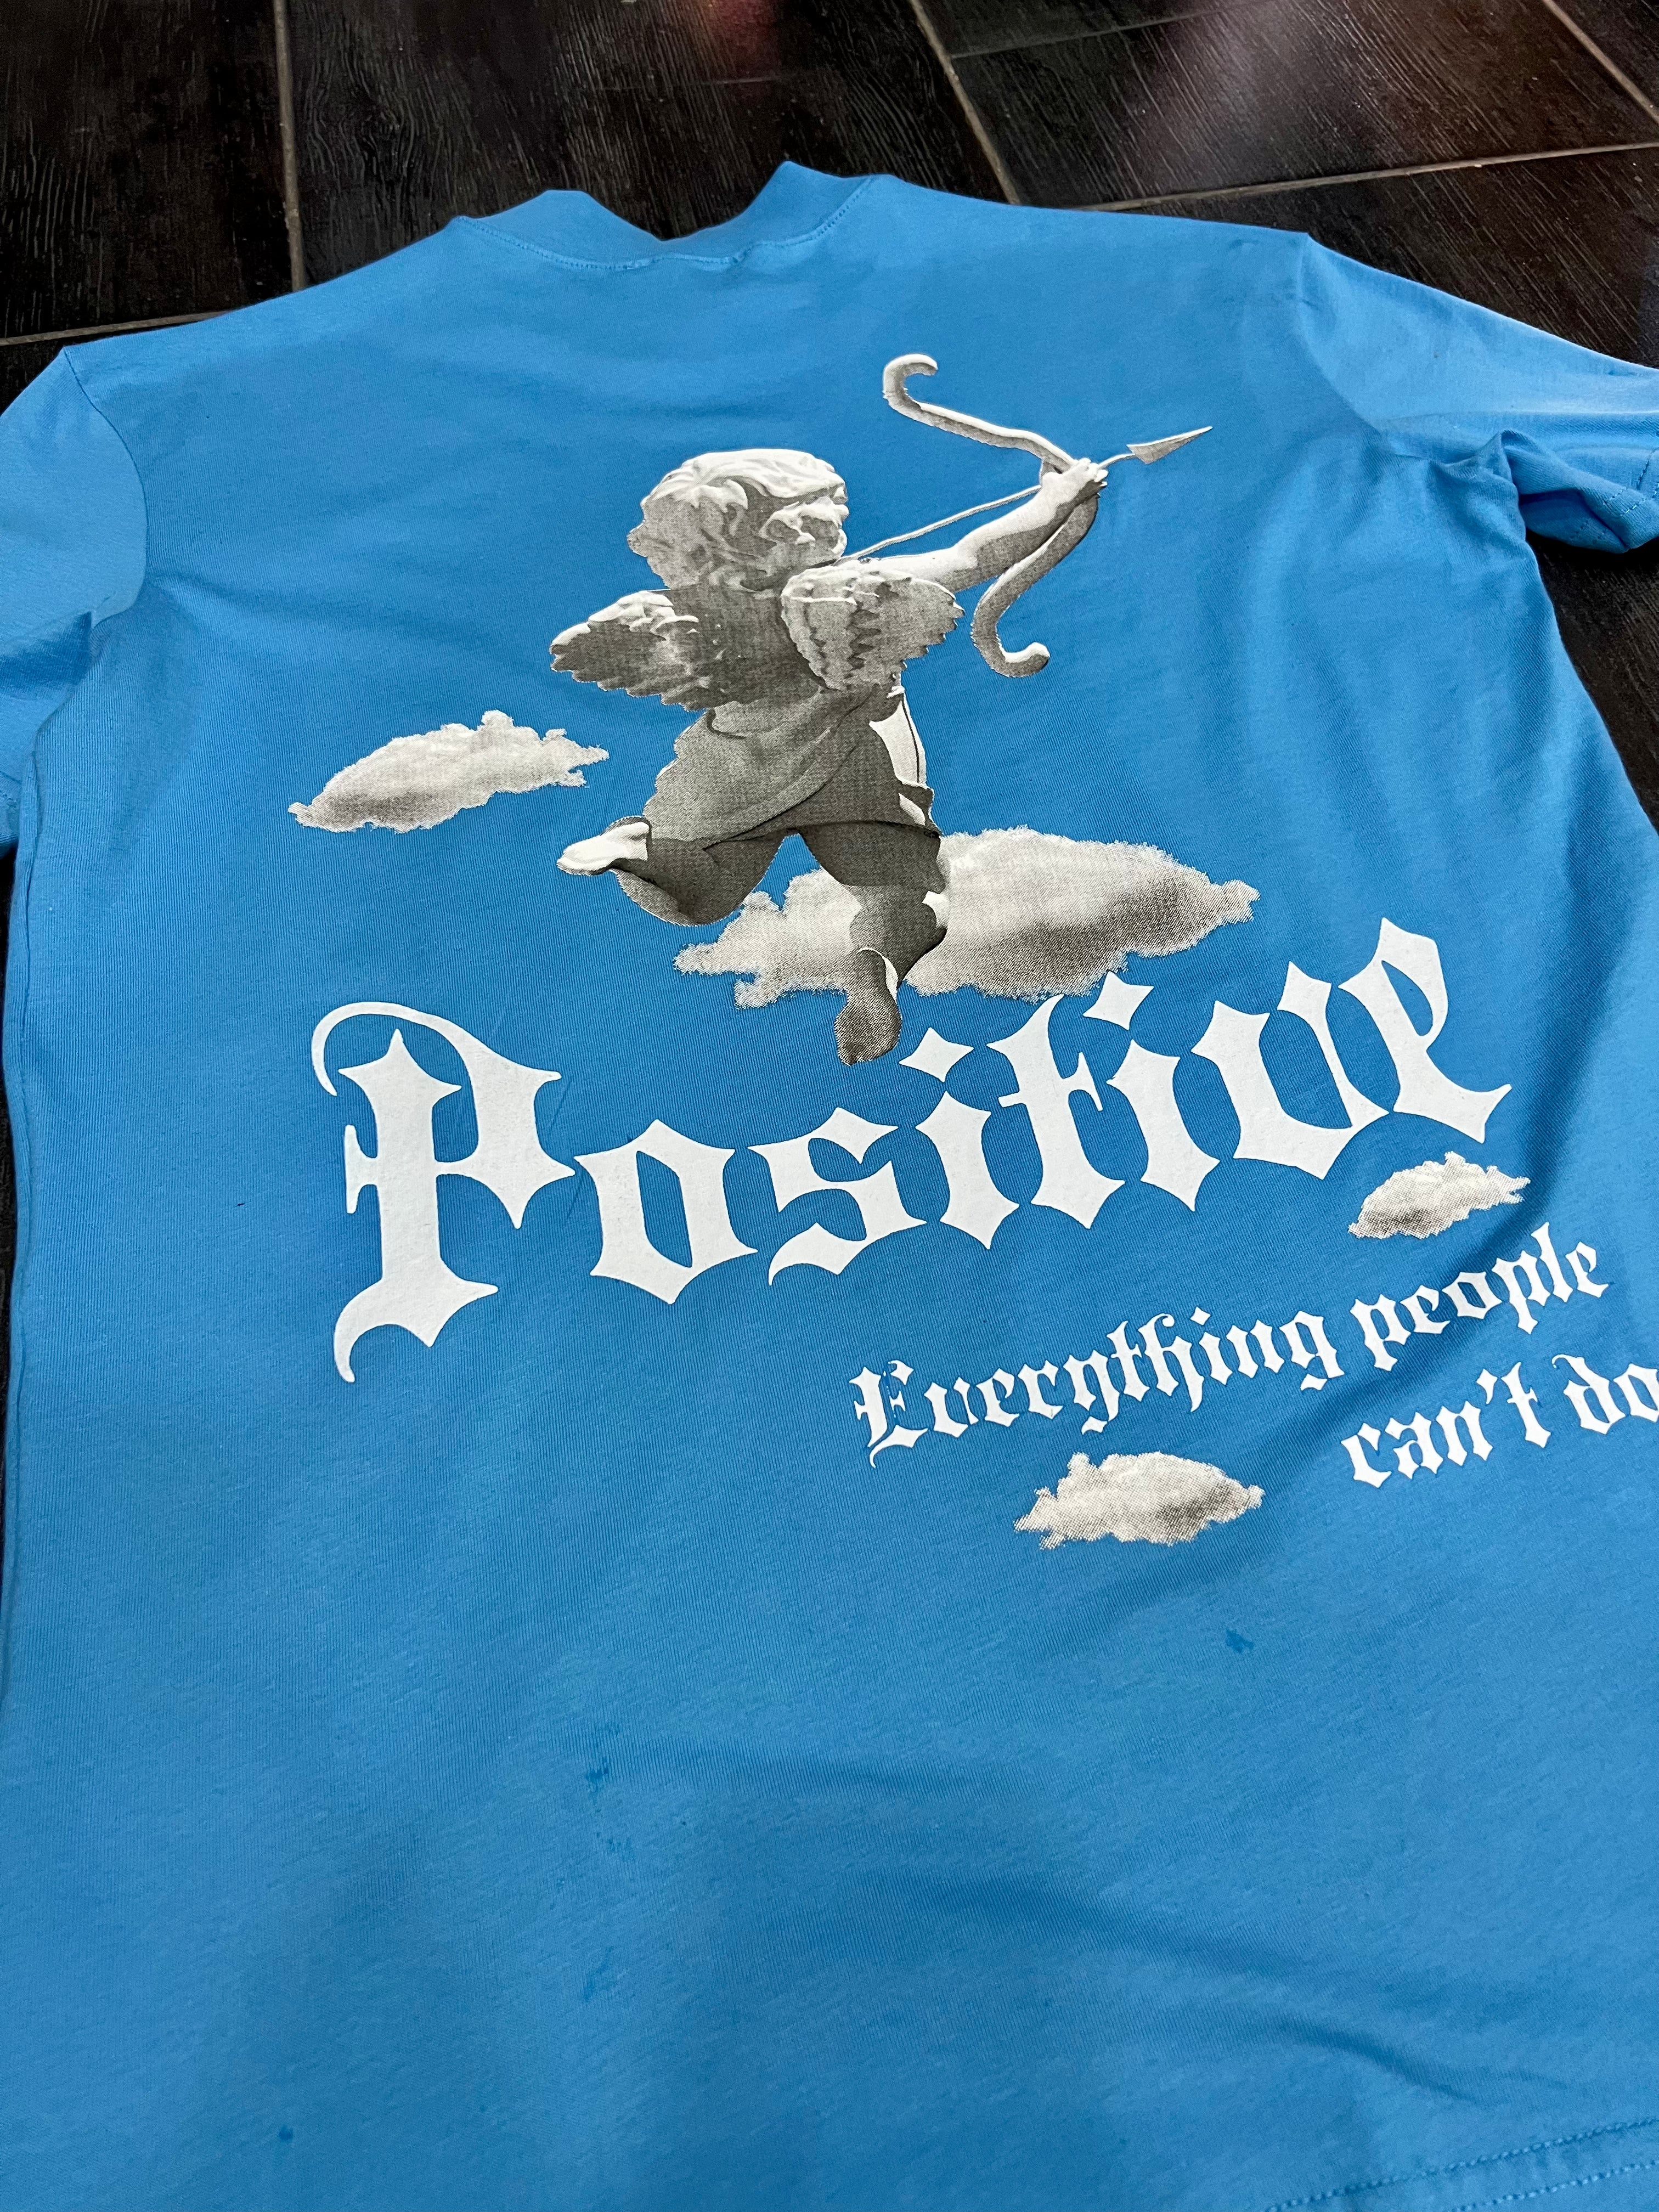 T-Shirt - Everything people can't do